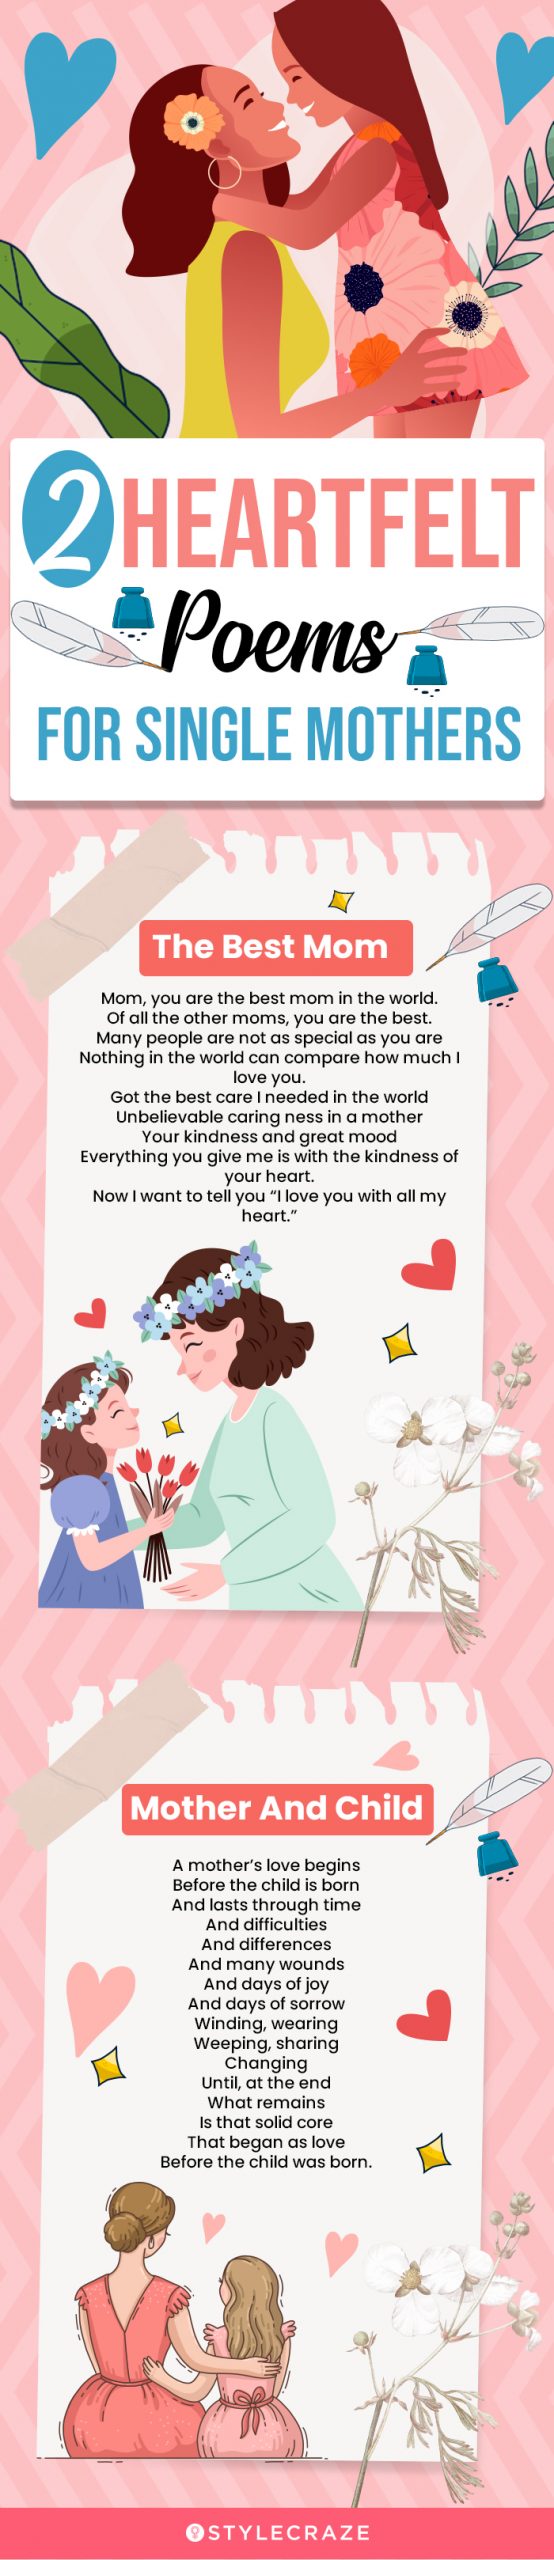 2 heartfelt poems for single mothers (infographic)